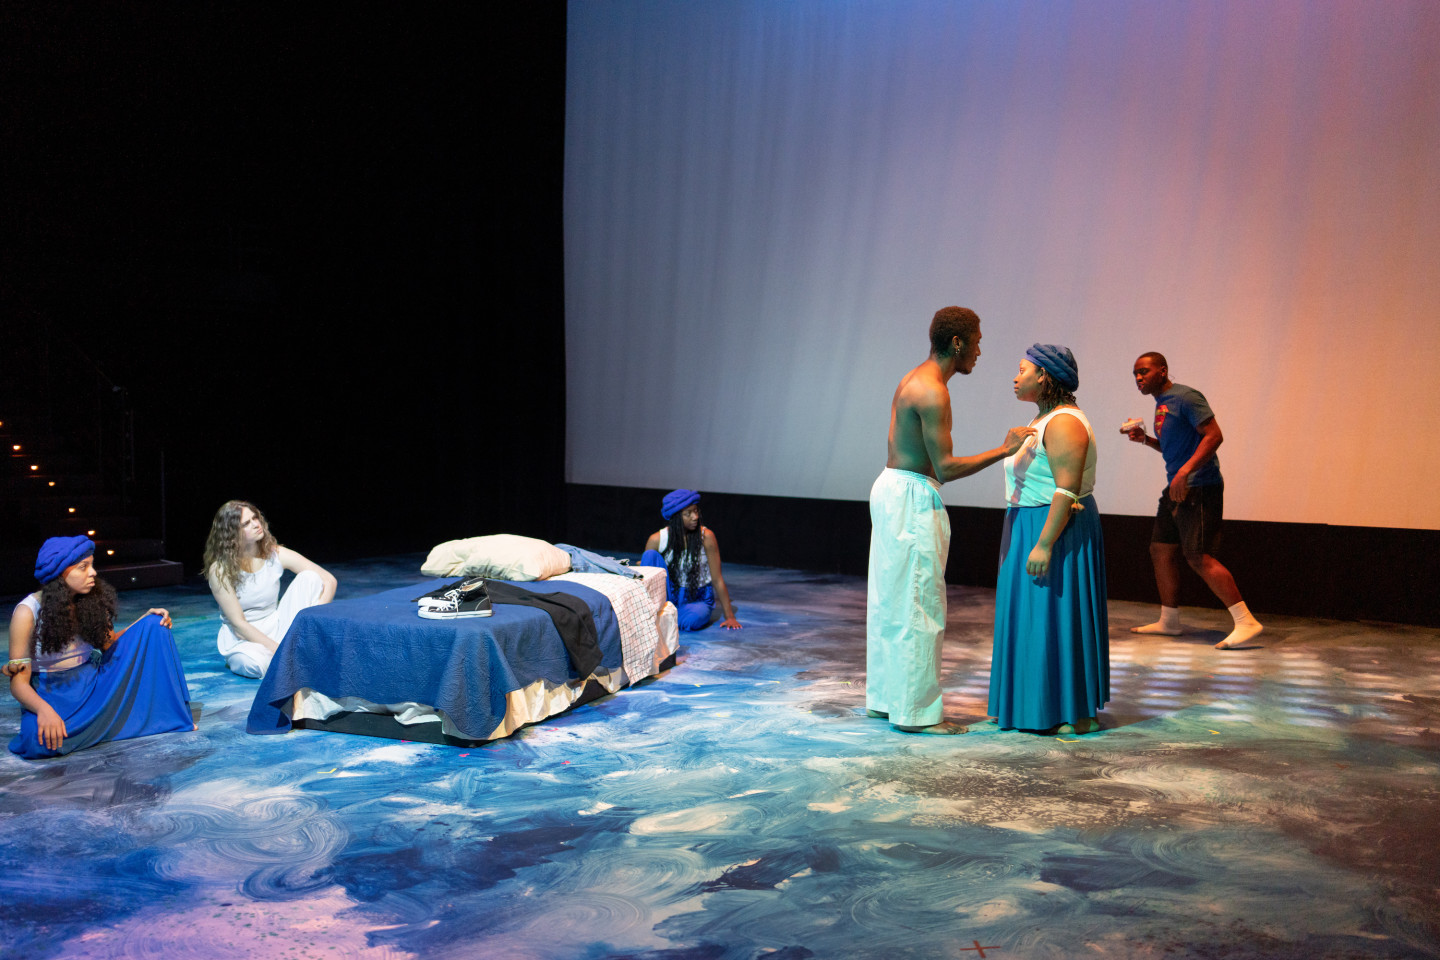 Actors perform on a stage filled with white and blue swirling colors.